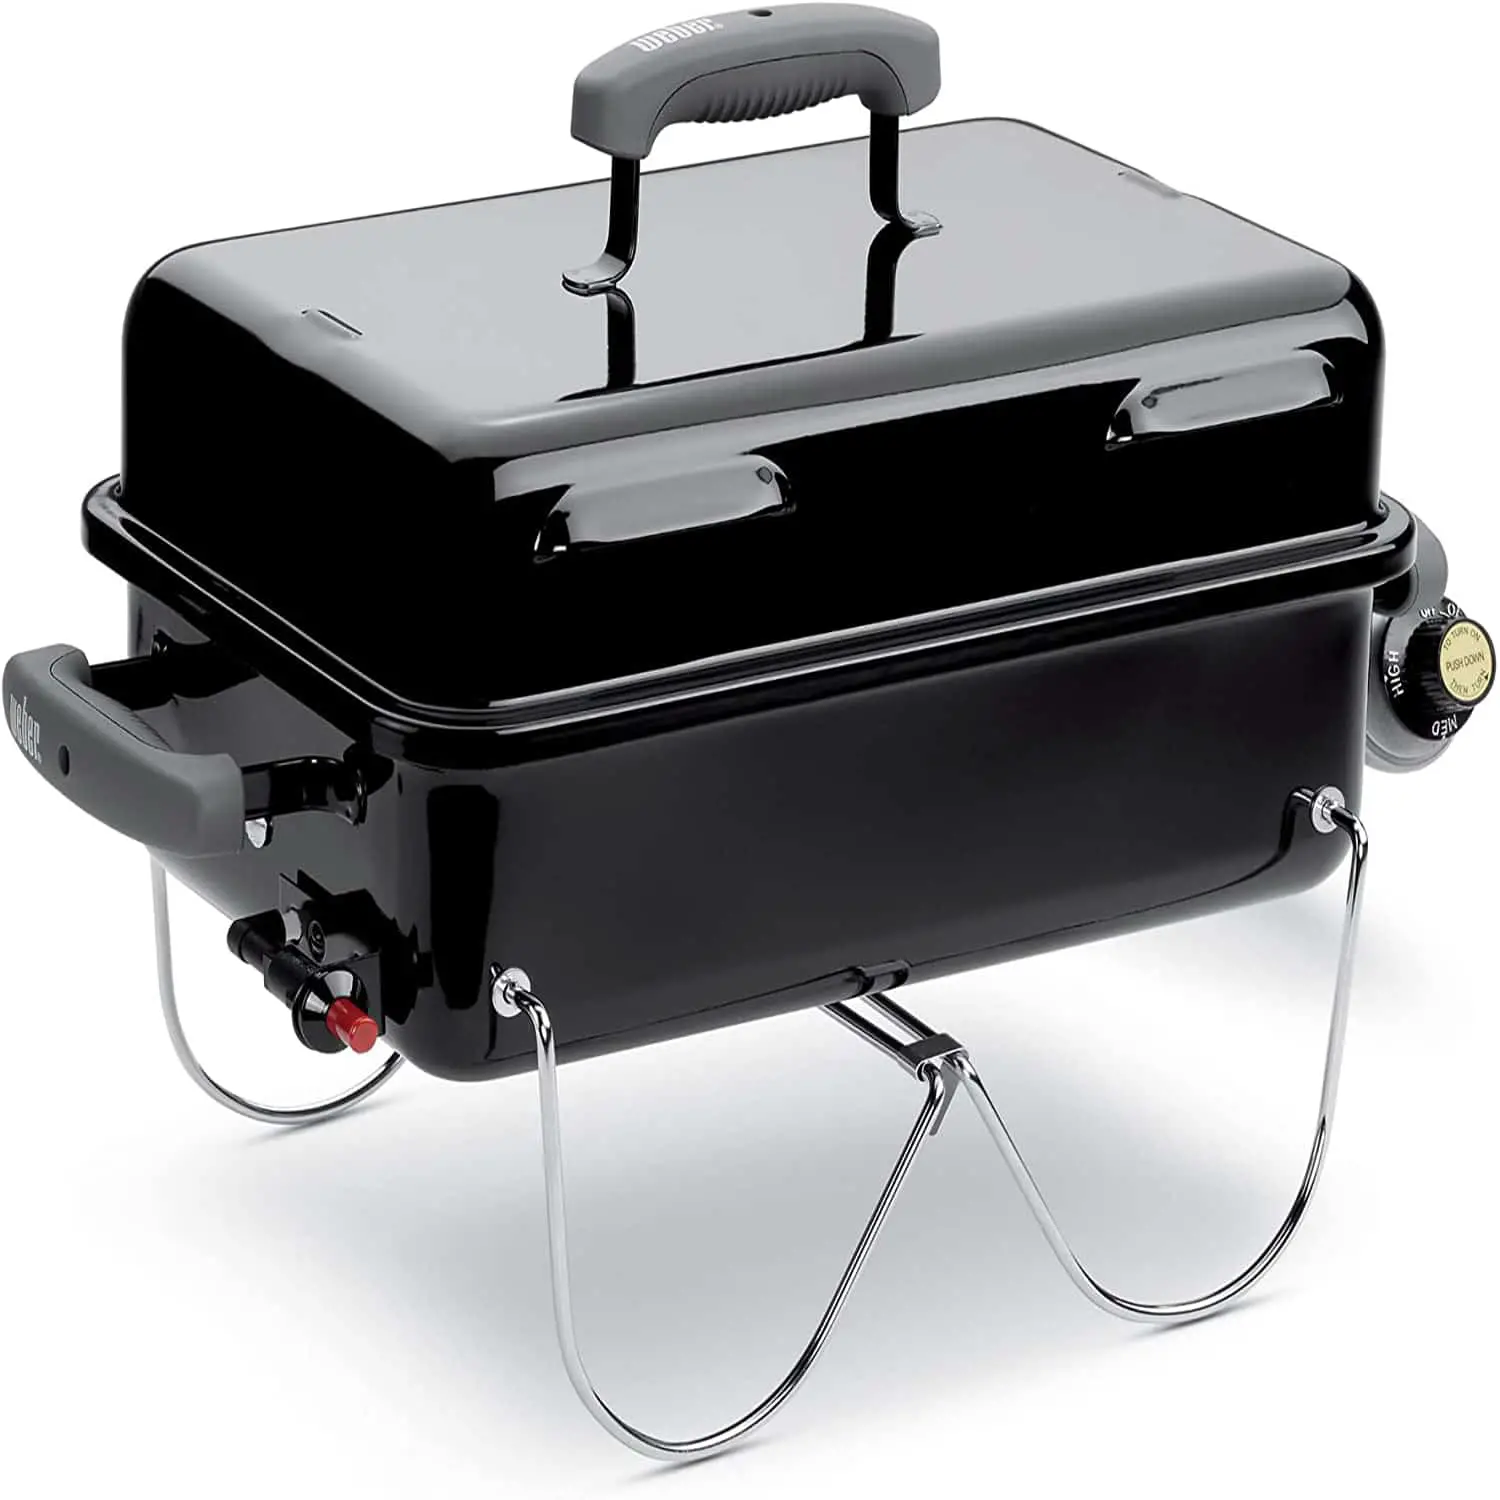 5 Best Small Gas Grills: When Size Matters!